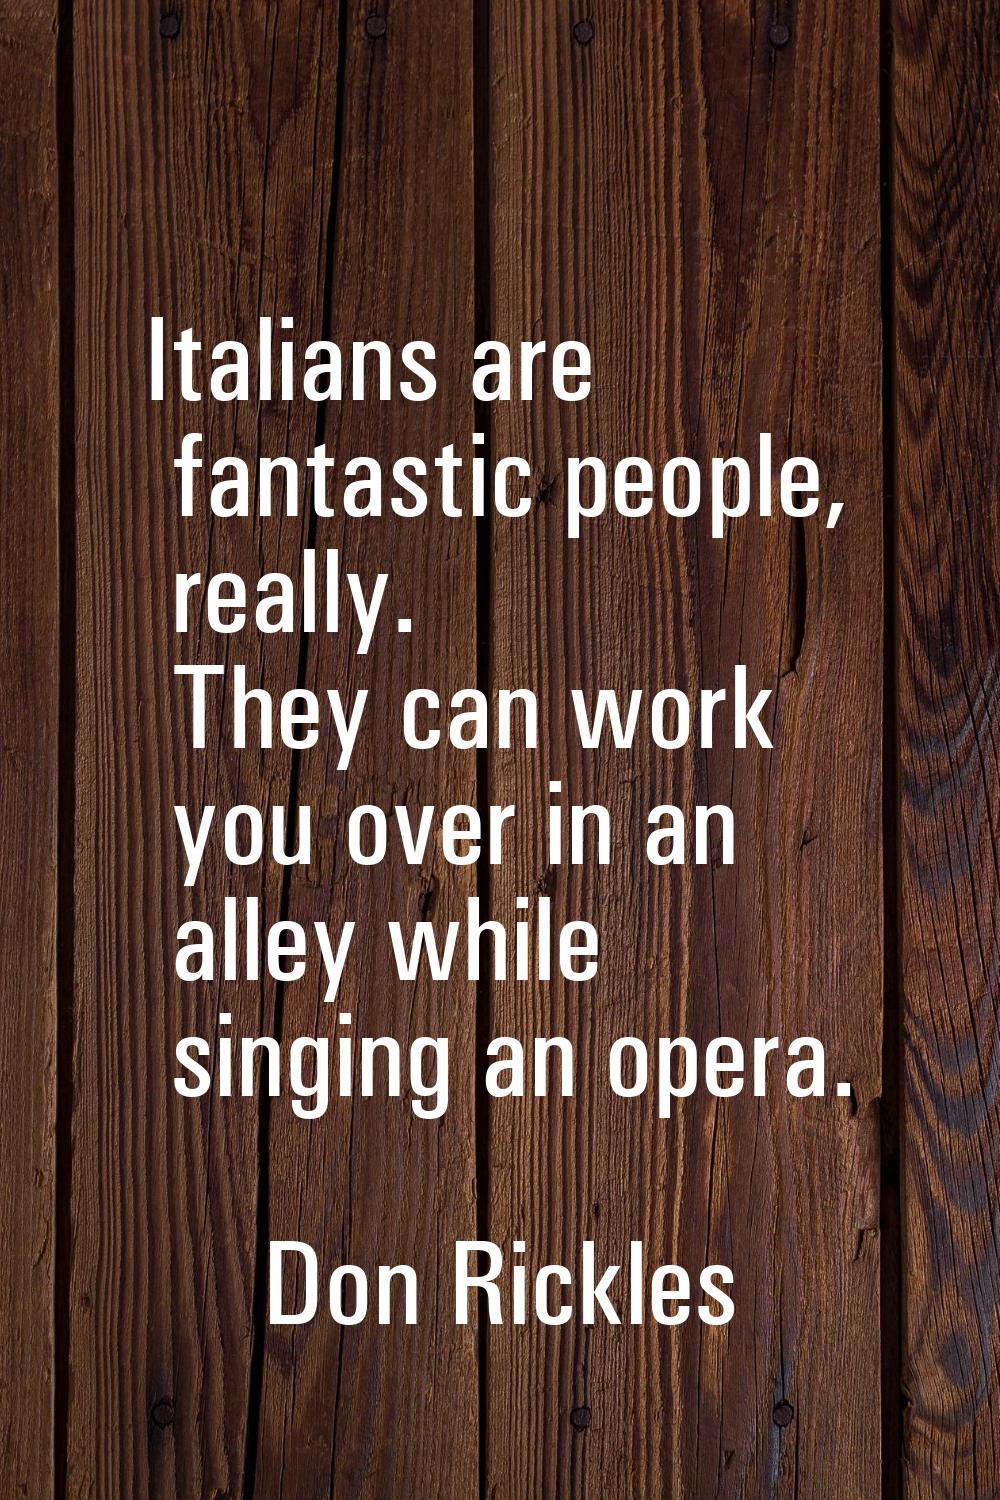 Italians are fantastic people, really. They can work you over in an alley while singing an opera.